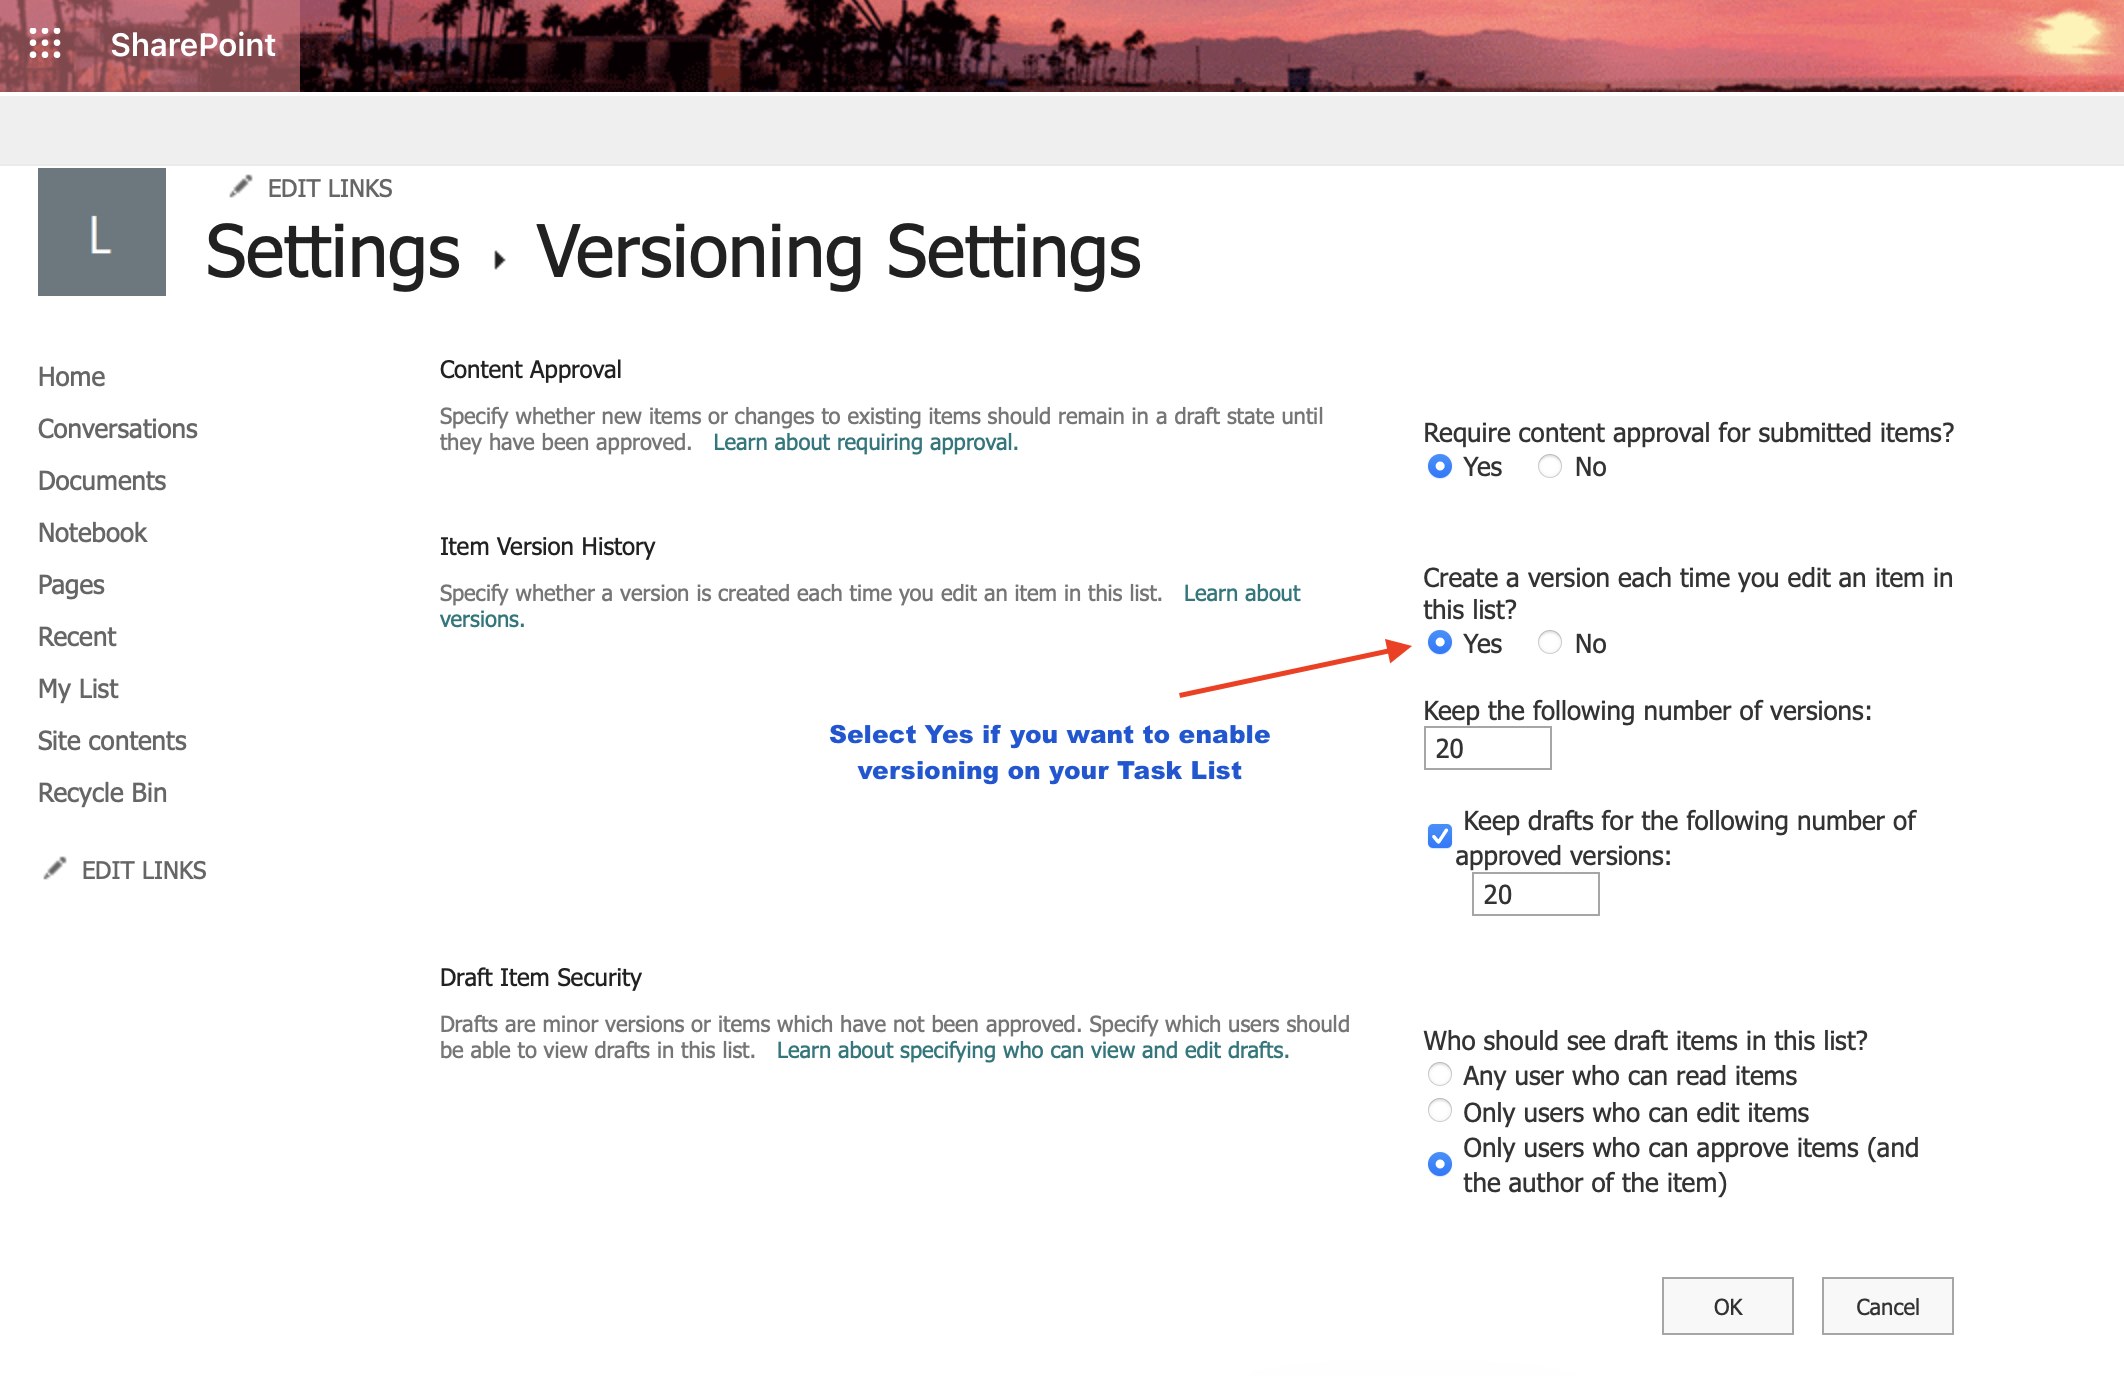 Select Yes if you want to enable versioning on your Task List